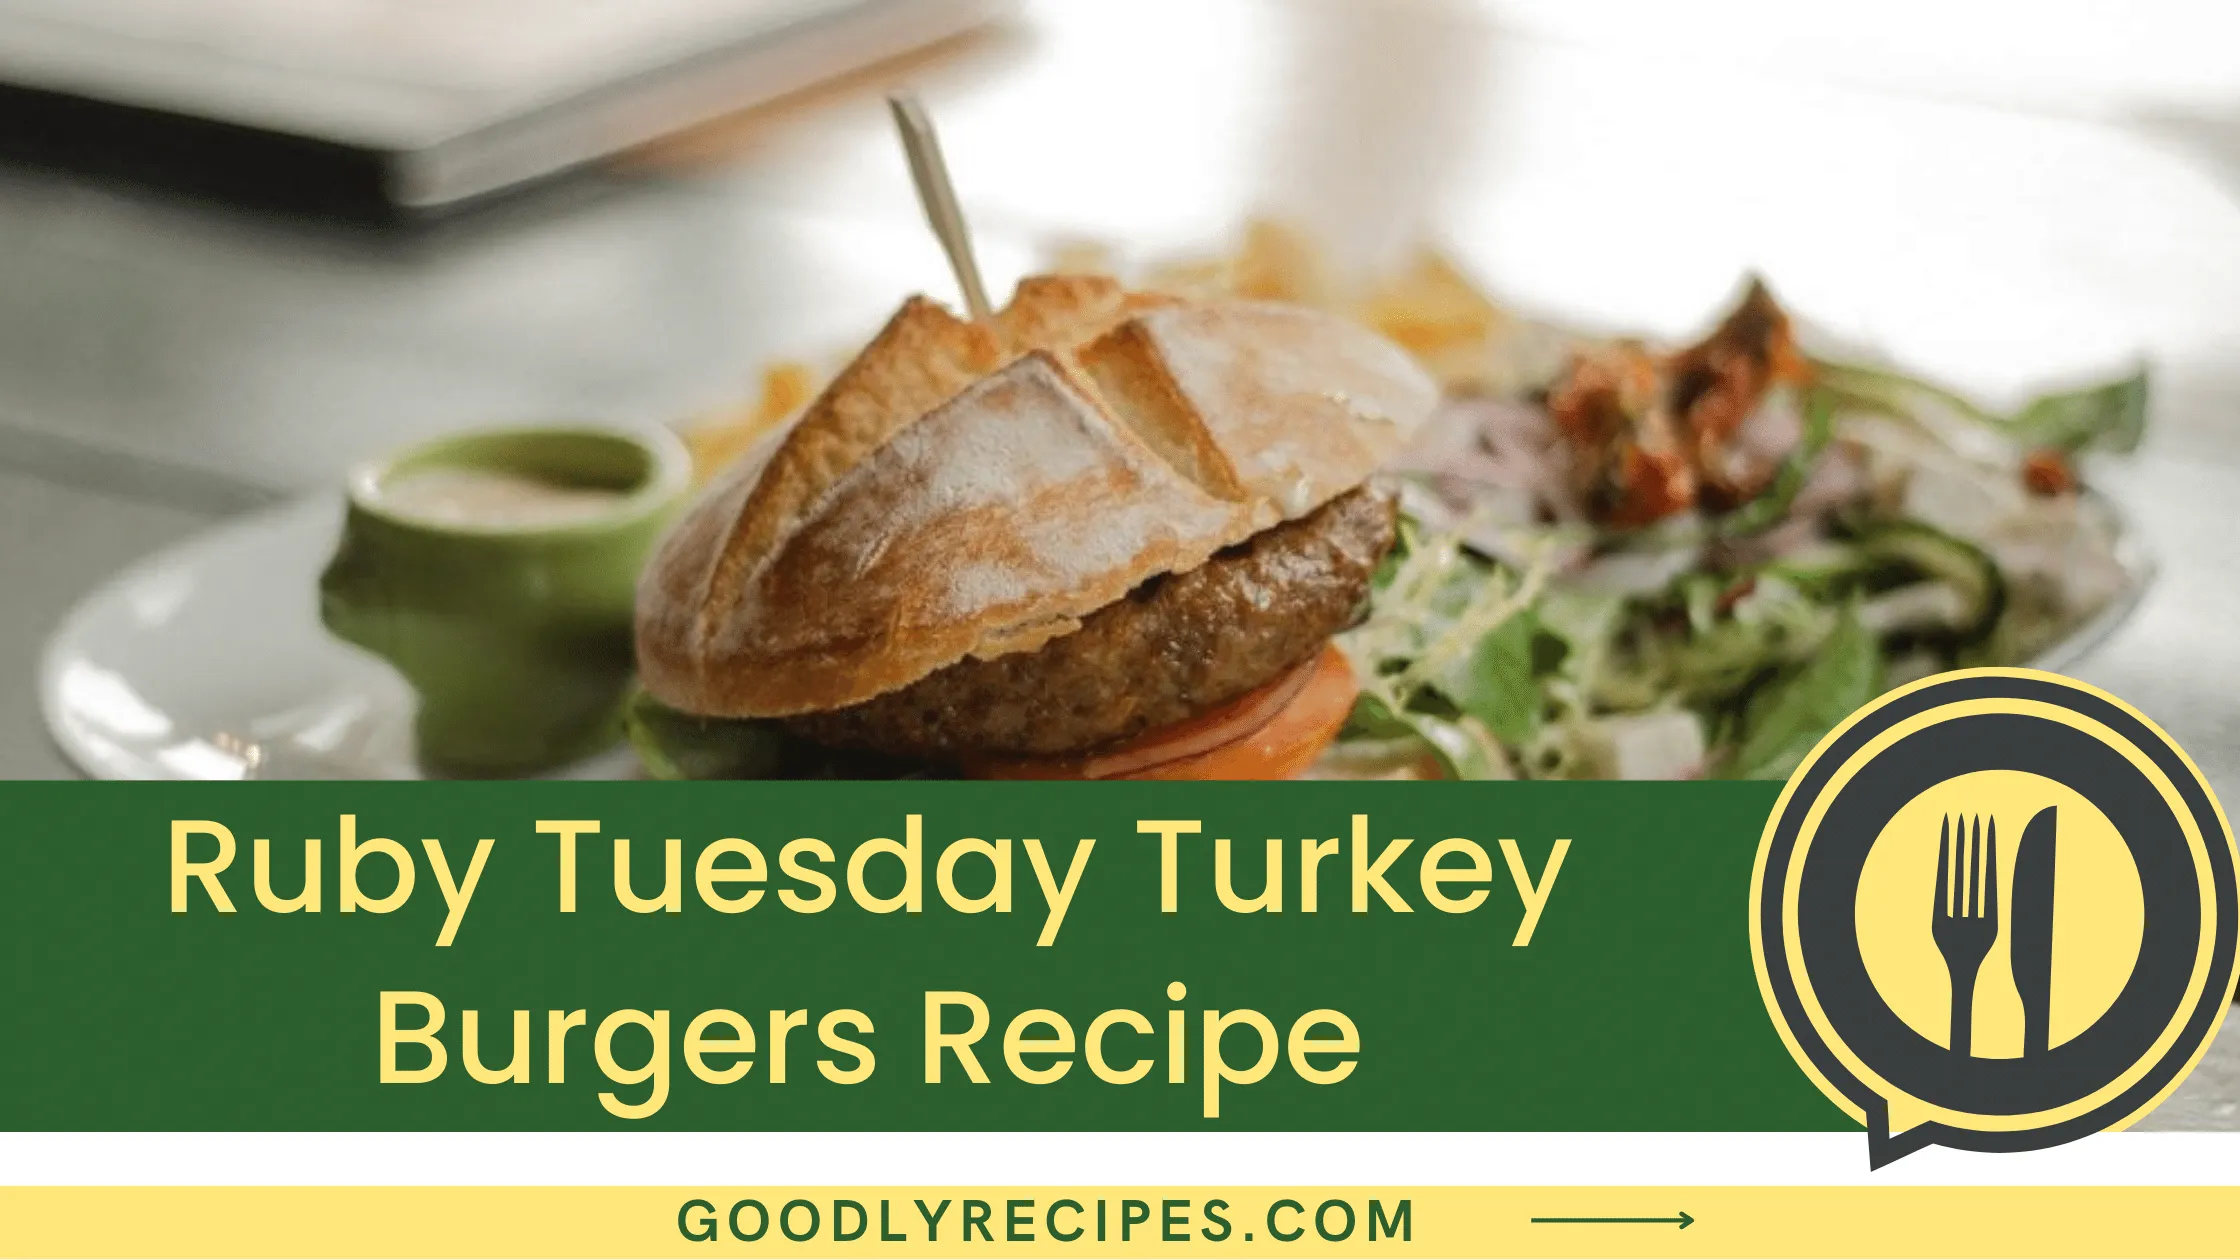 Ruby Tuesday Turkey Burgers Recipe - For Food Lovers